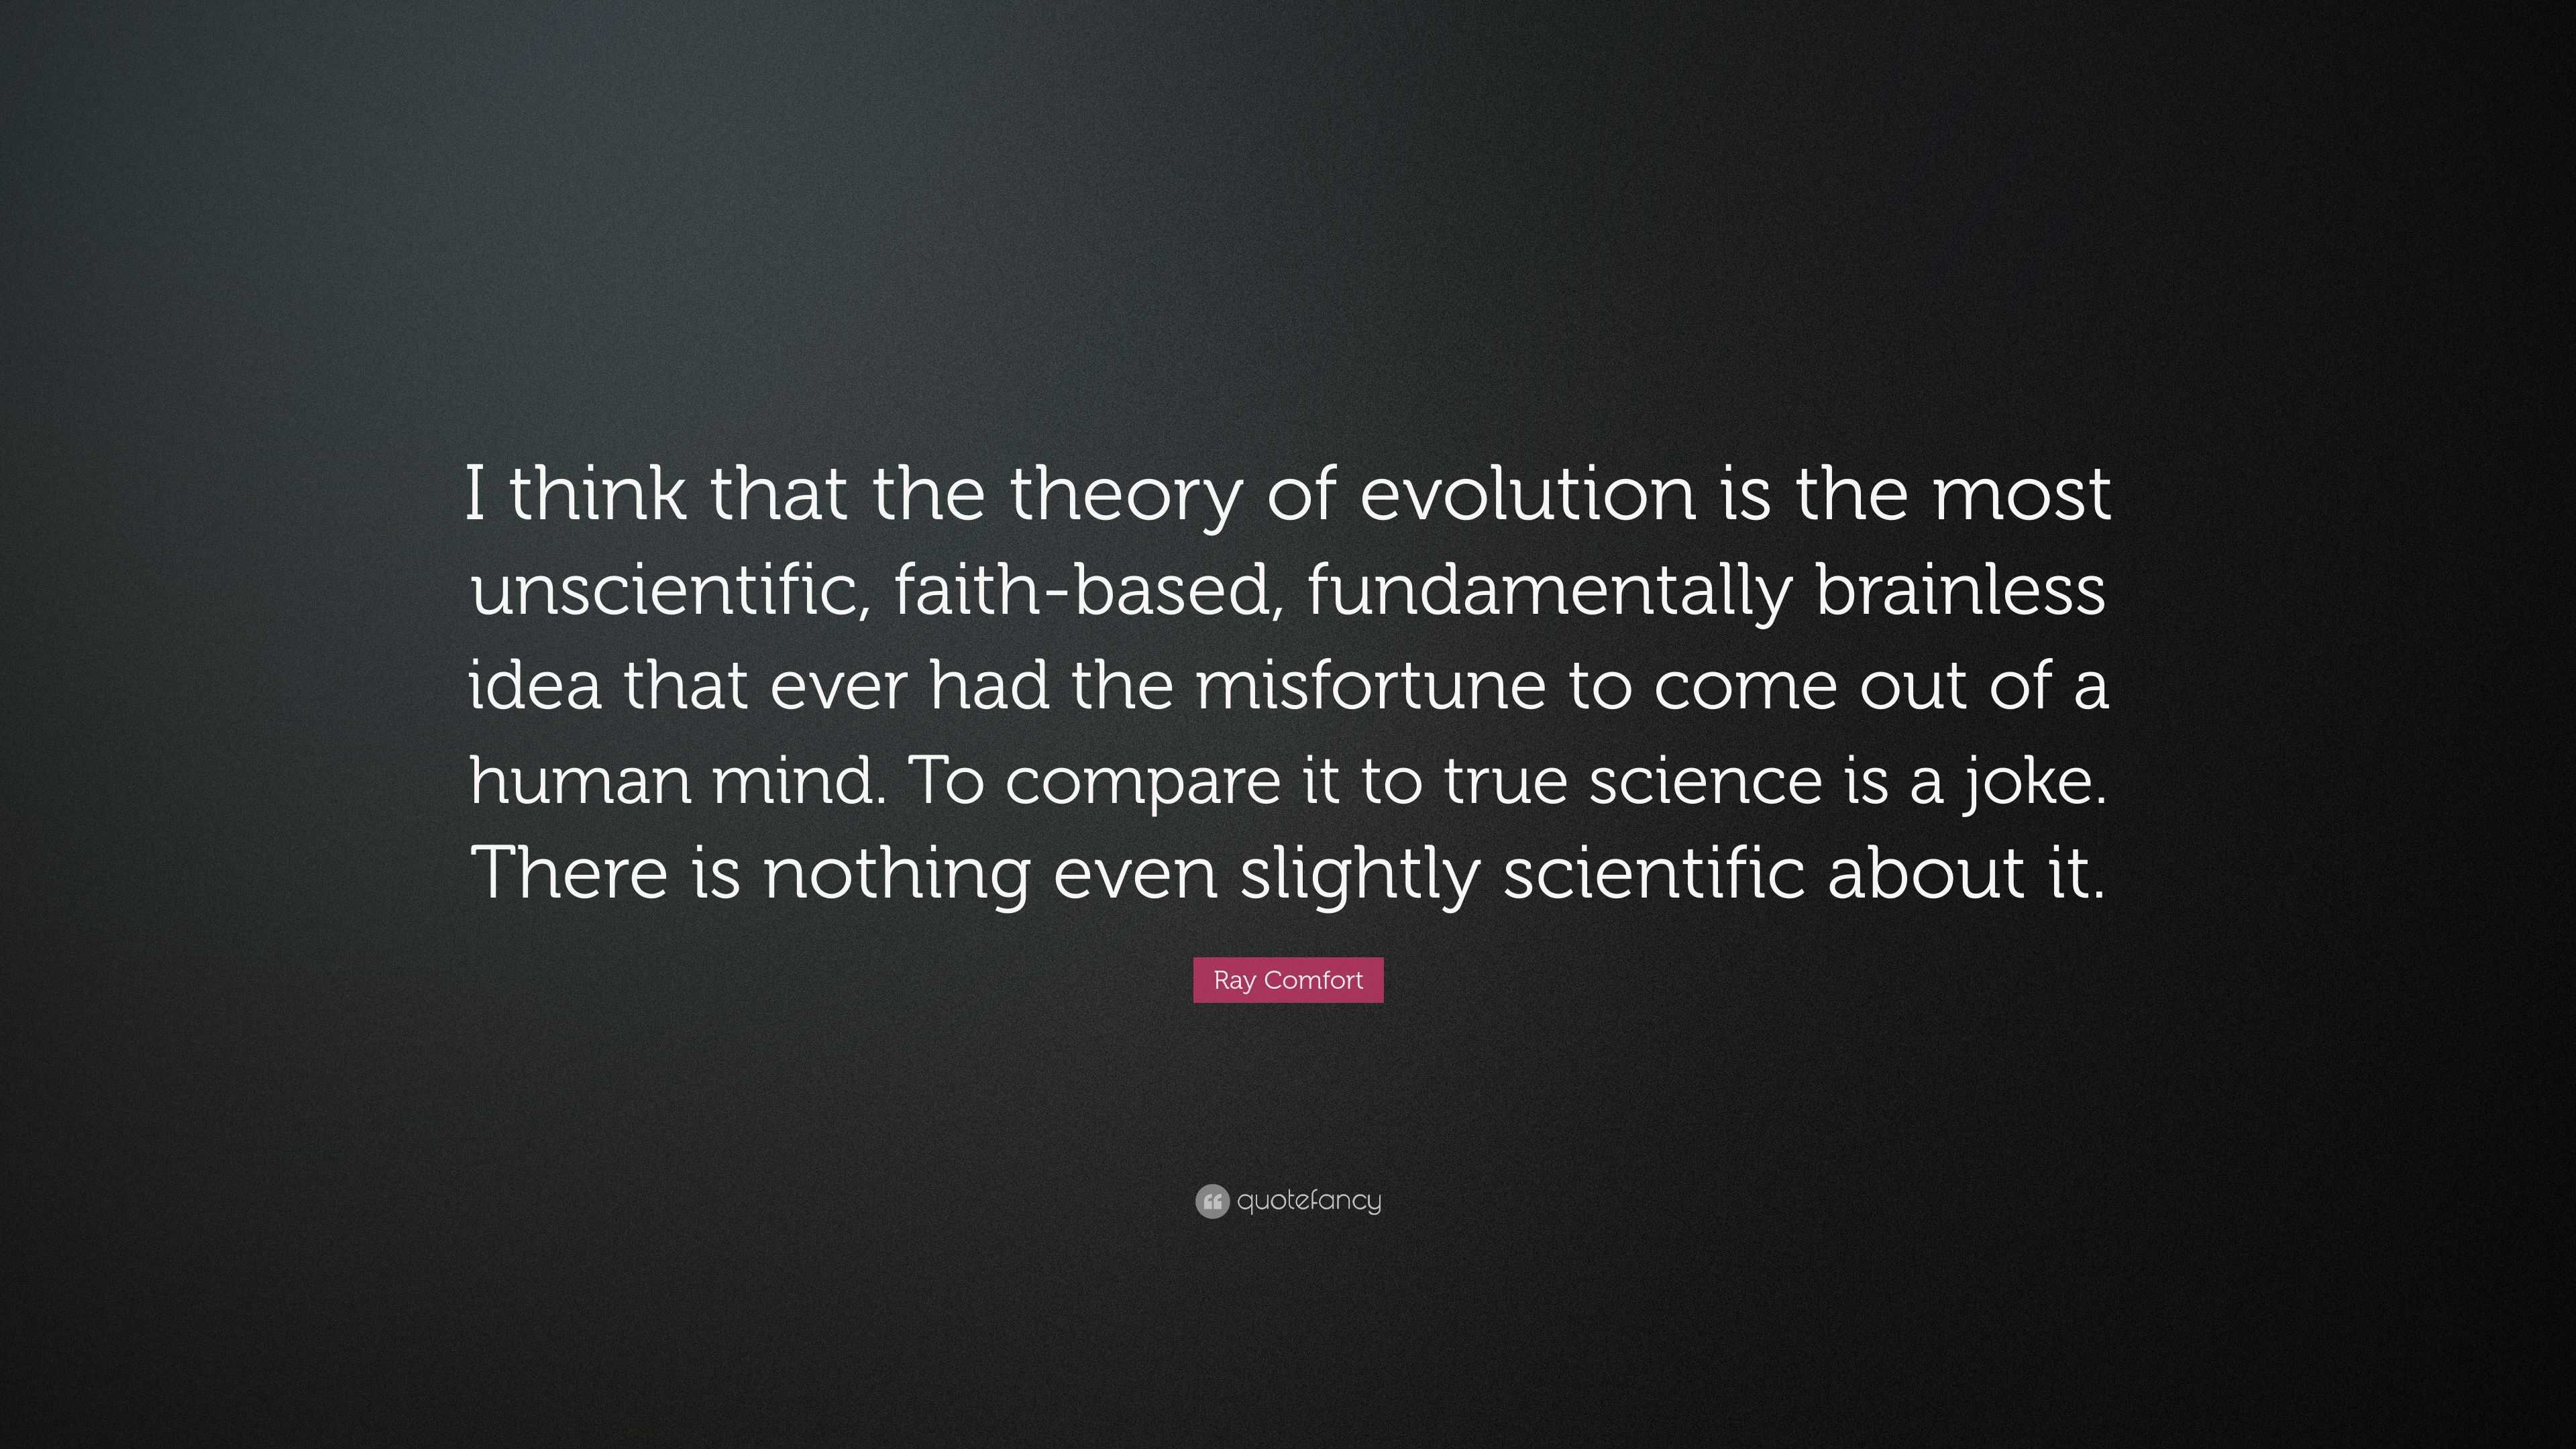 Ray Comfort quote: Evolution is unobservable. It's based on blind